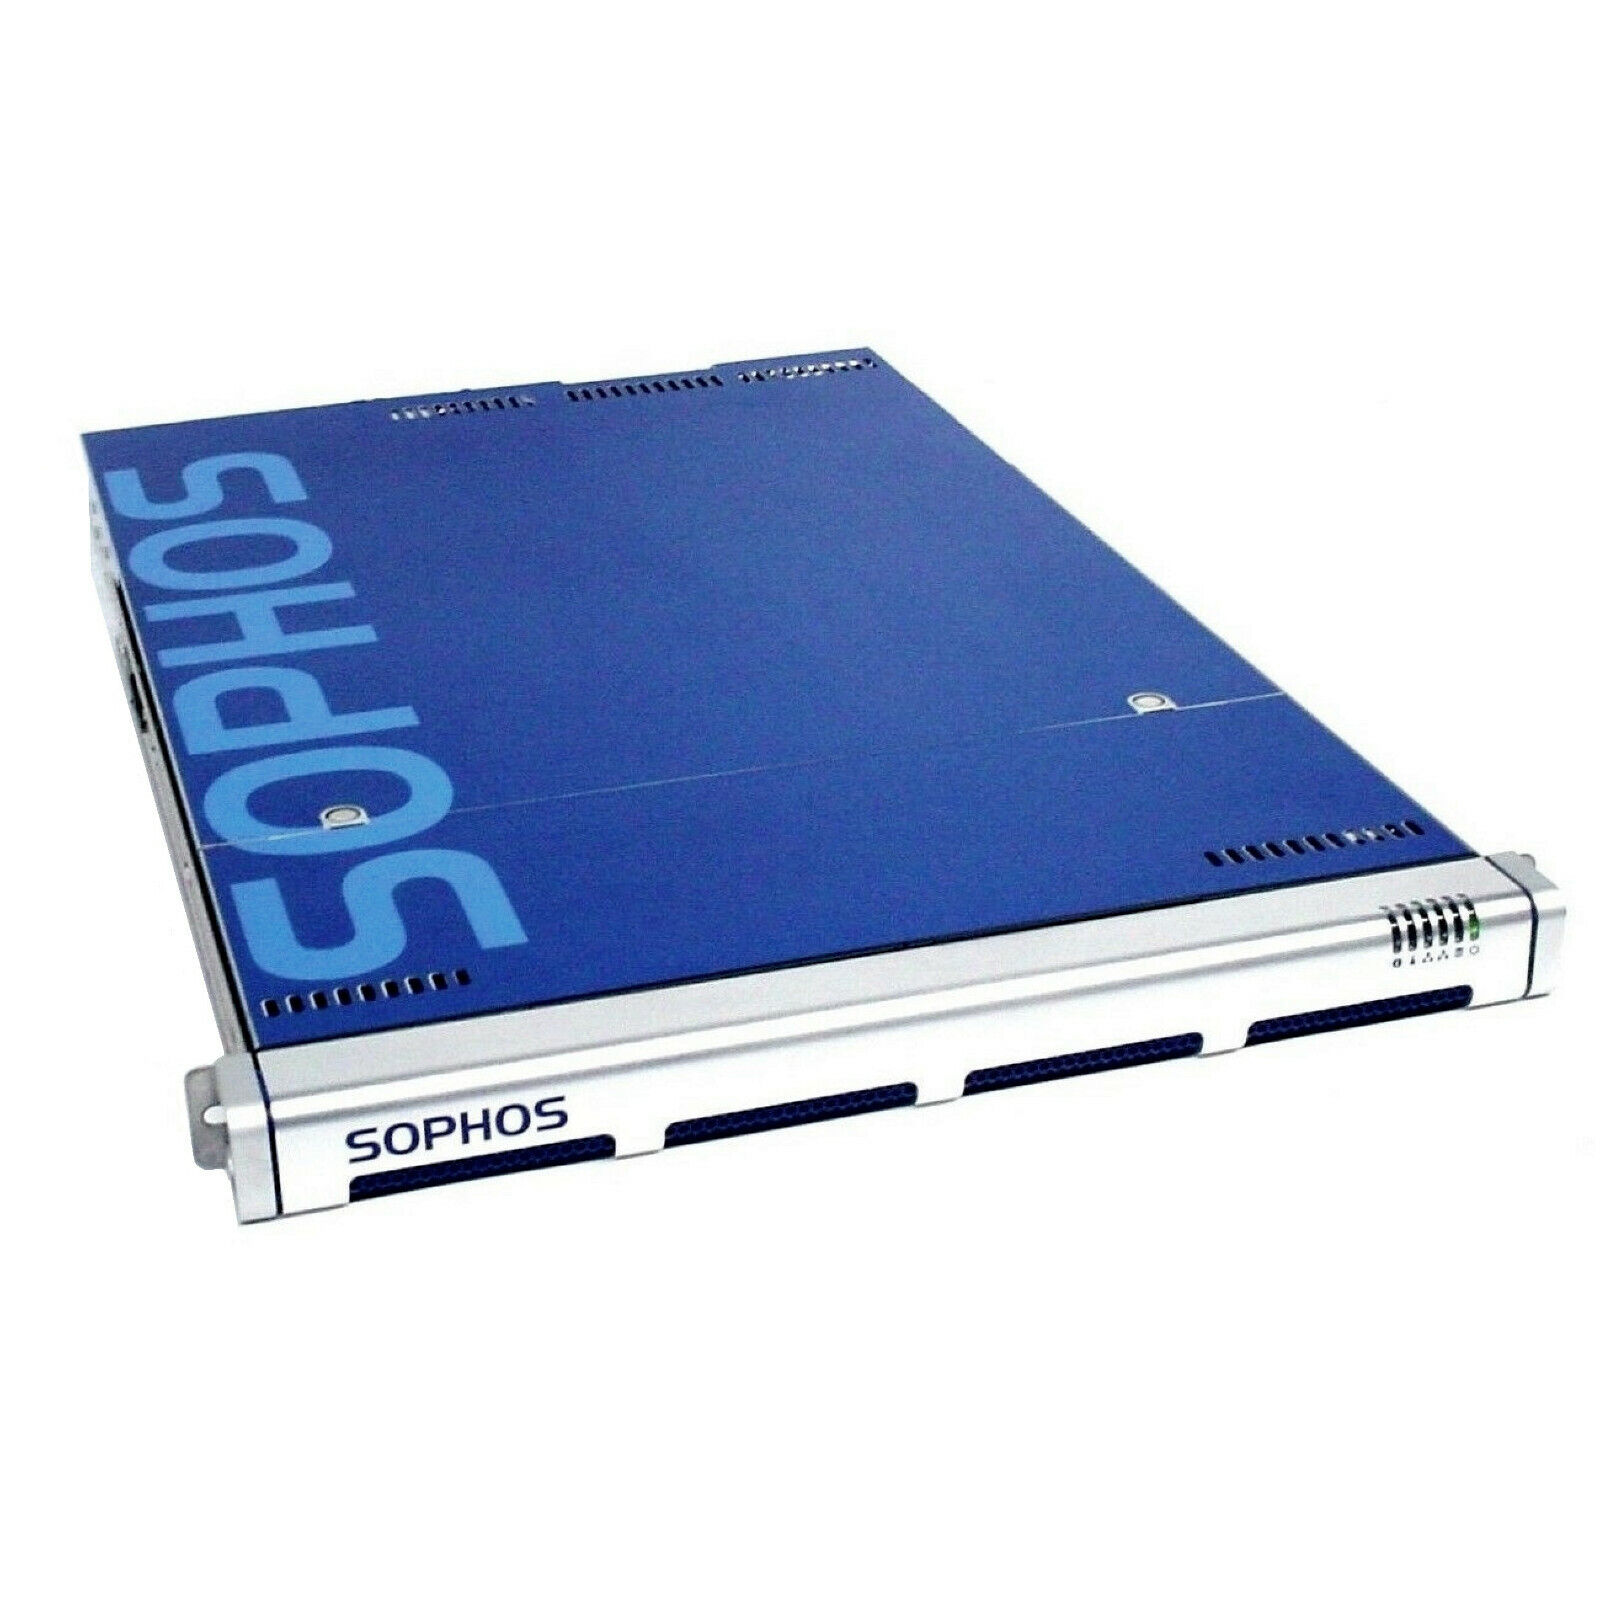 Sophos ES4000 Virus Spam Email Security Genotype Detection Appliance w/ 2 Drives